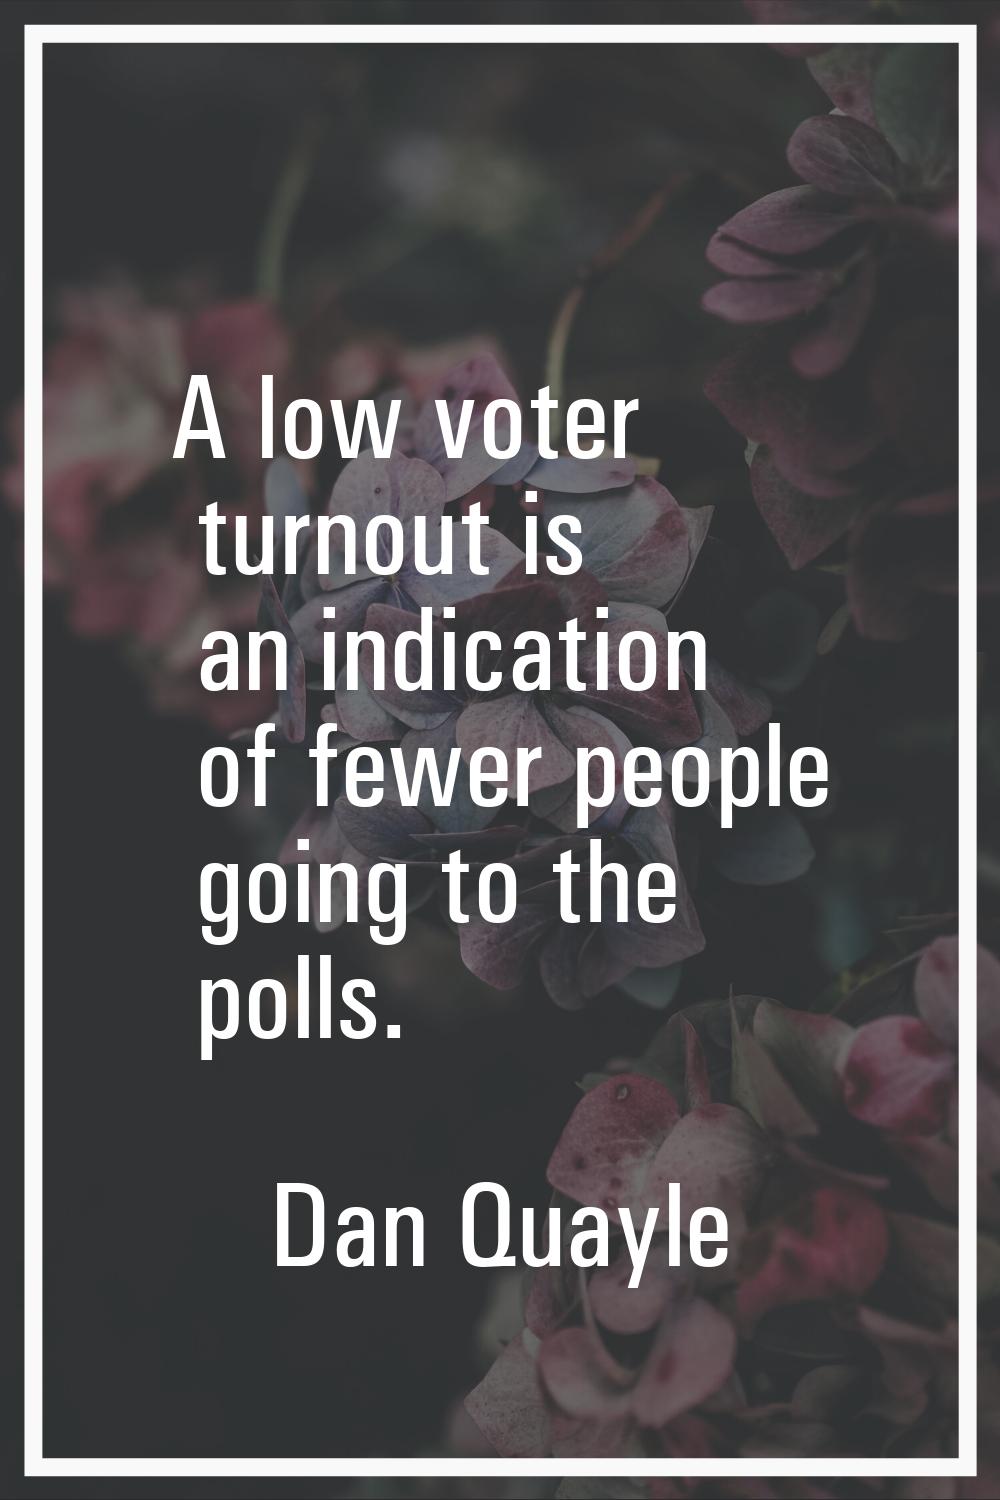 A low voter turnout is an indication of fewer people going to the polls.